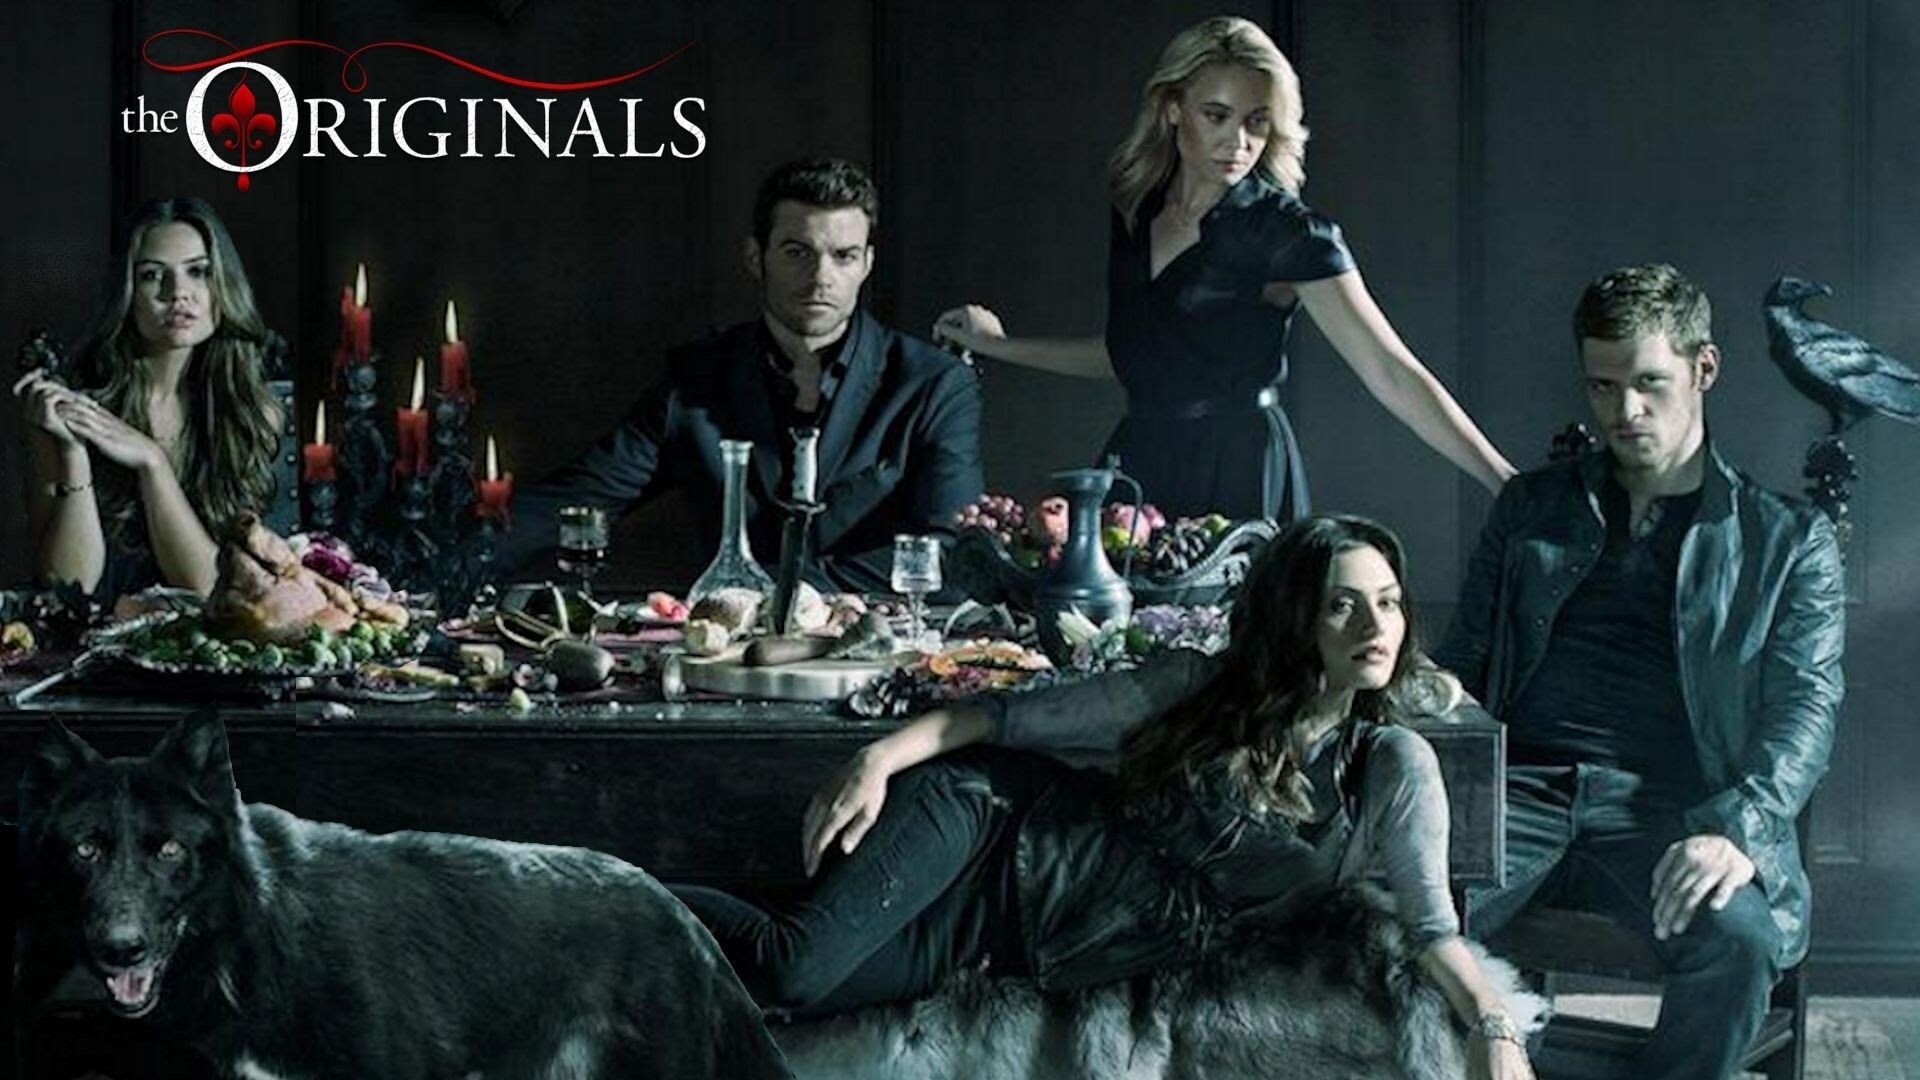 The Originals (TV Series): The Mikaelson family, The first vampires ever to exist, An American horror fantasy drama. 1920x1080 Full HD Wallpaper.